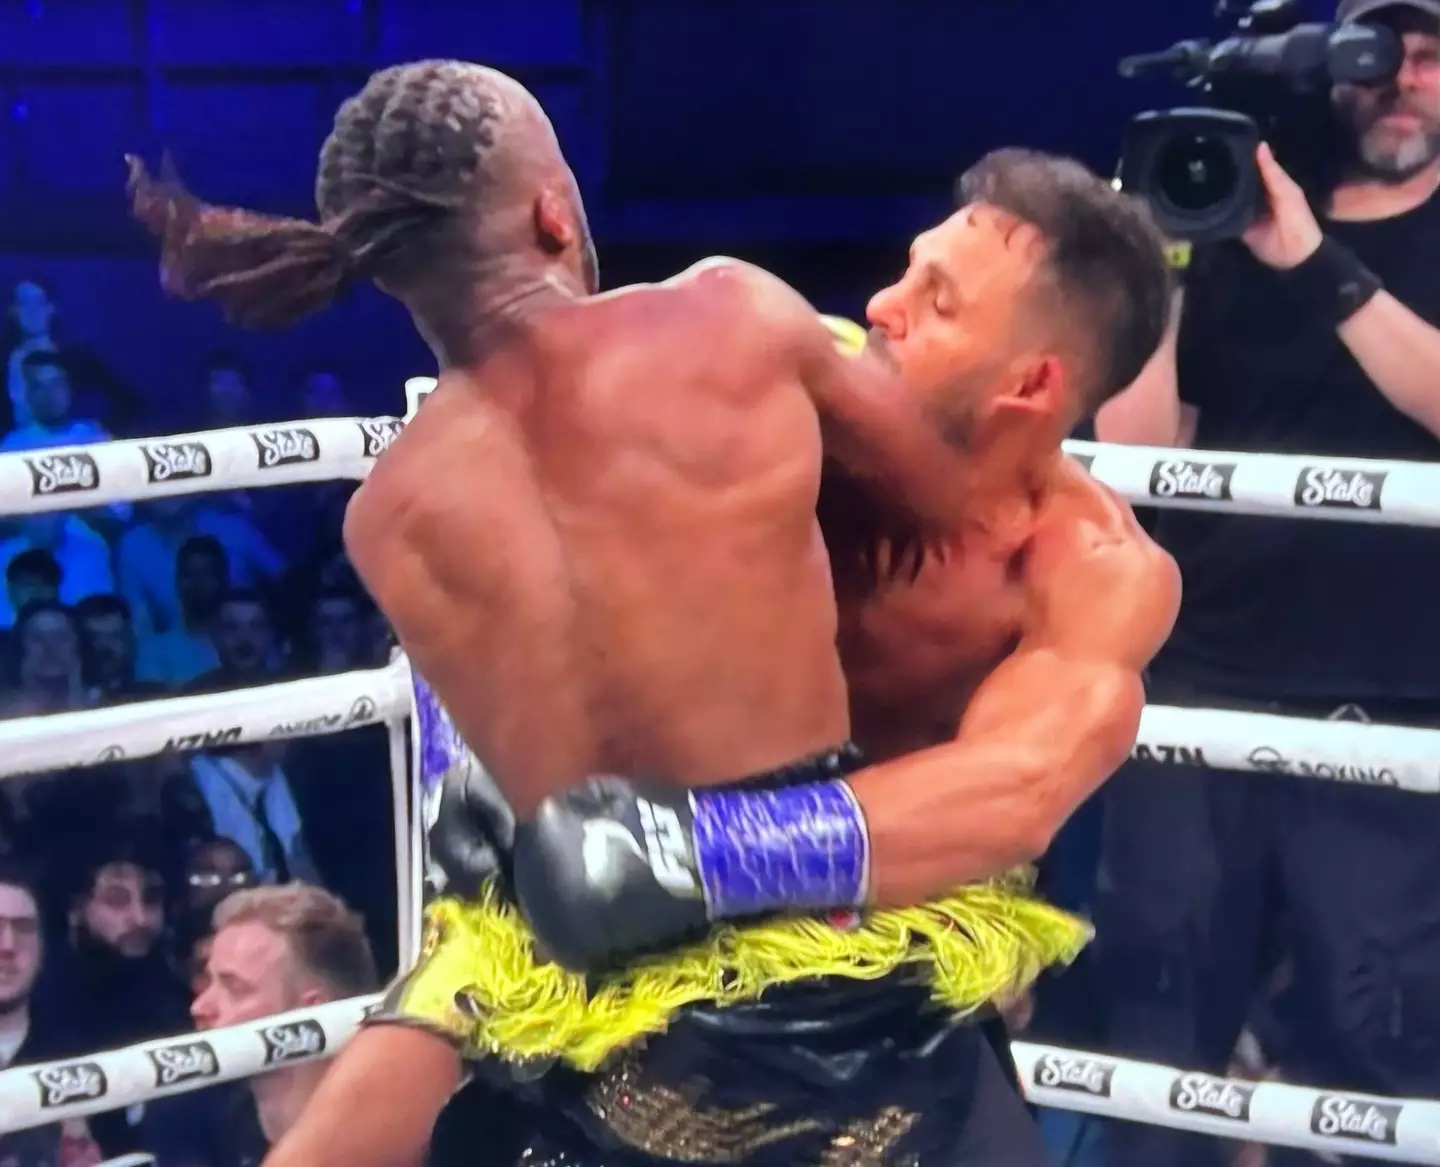 What appears to be an elbow from KSI knocking Joe Fournier out. (Image